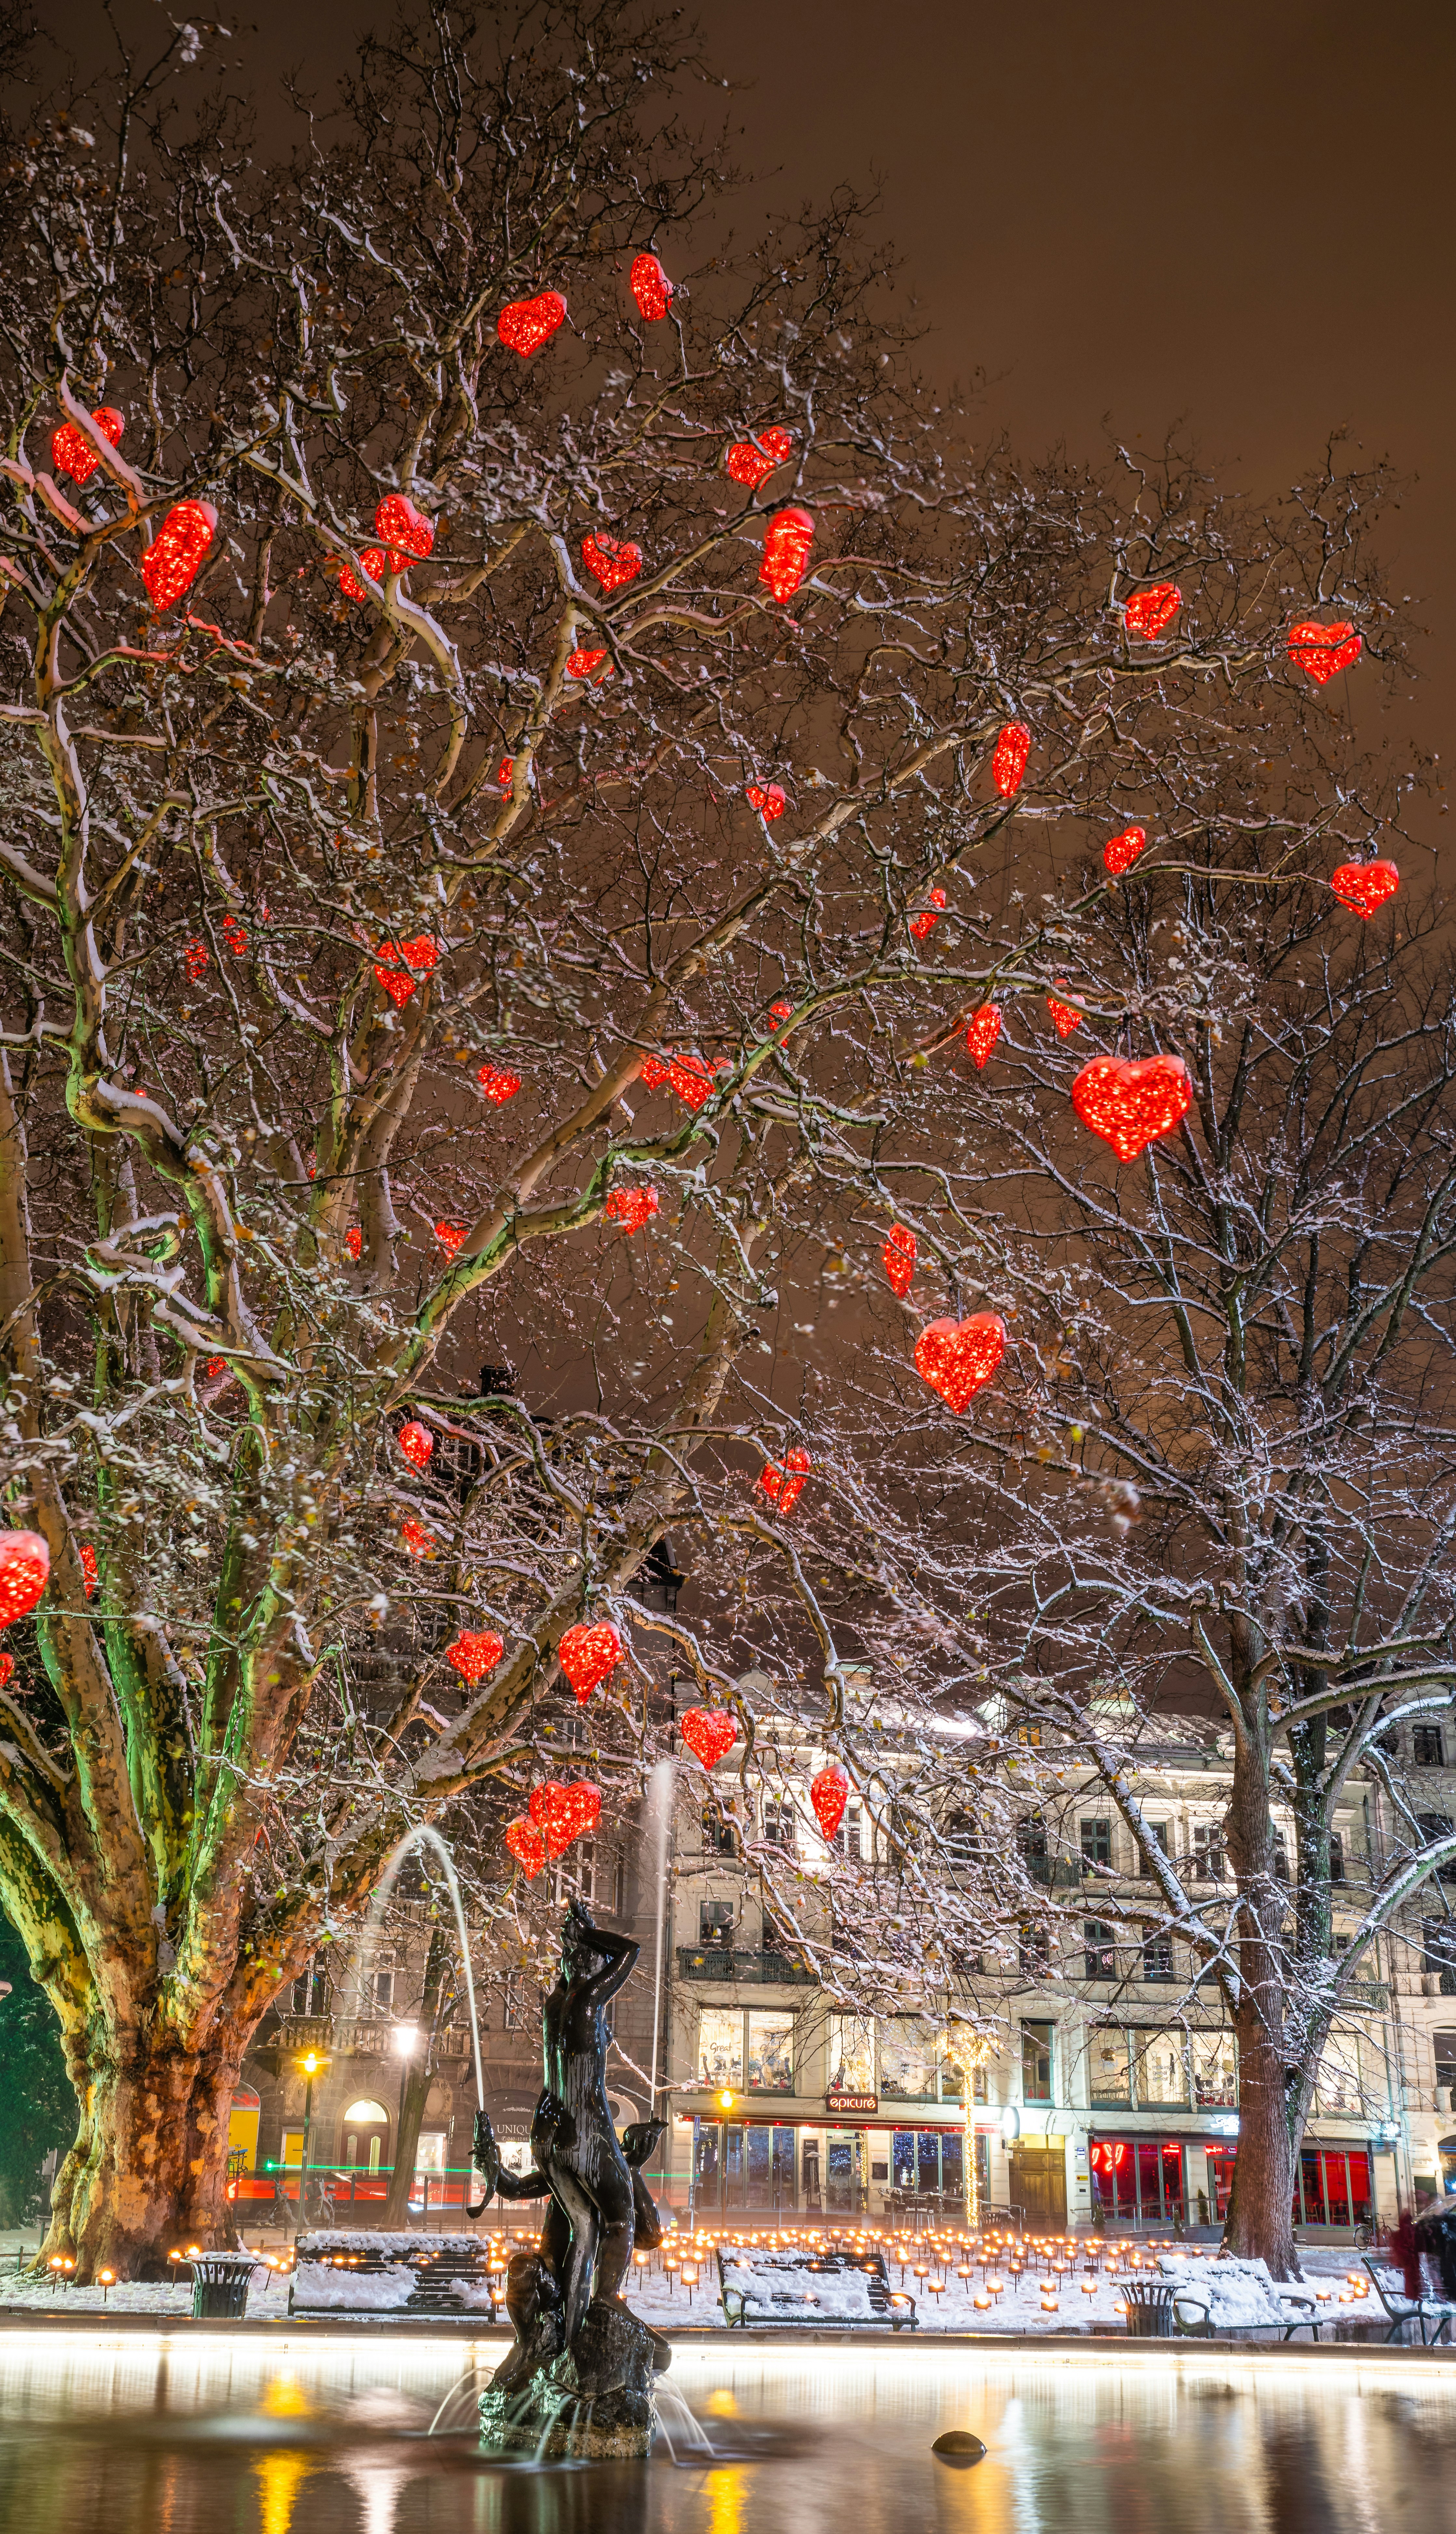 The tree of love filled with red hearts stands at Gusav Adolf's Square in Malmo at christmas time